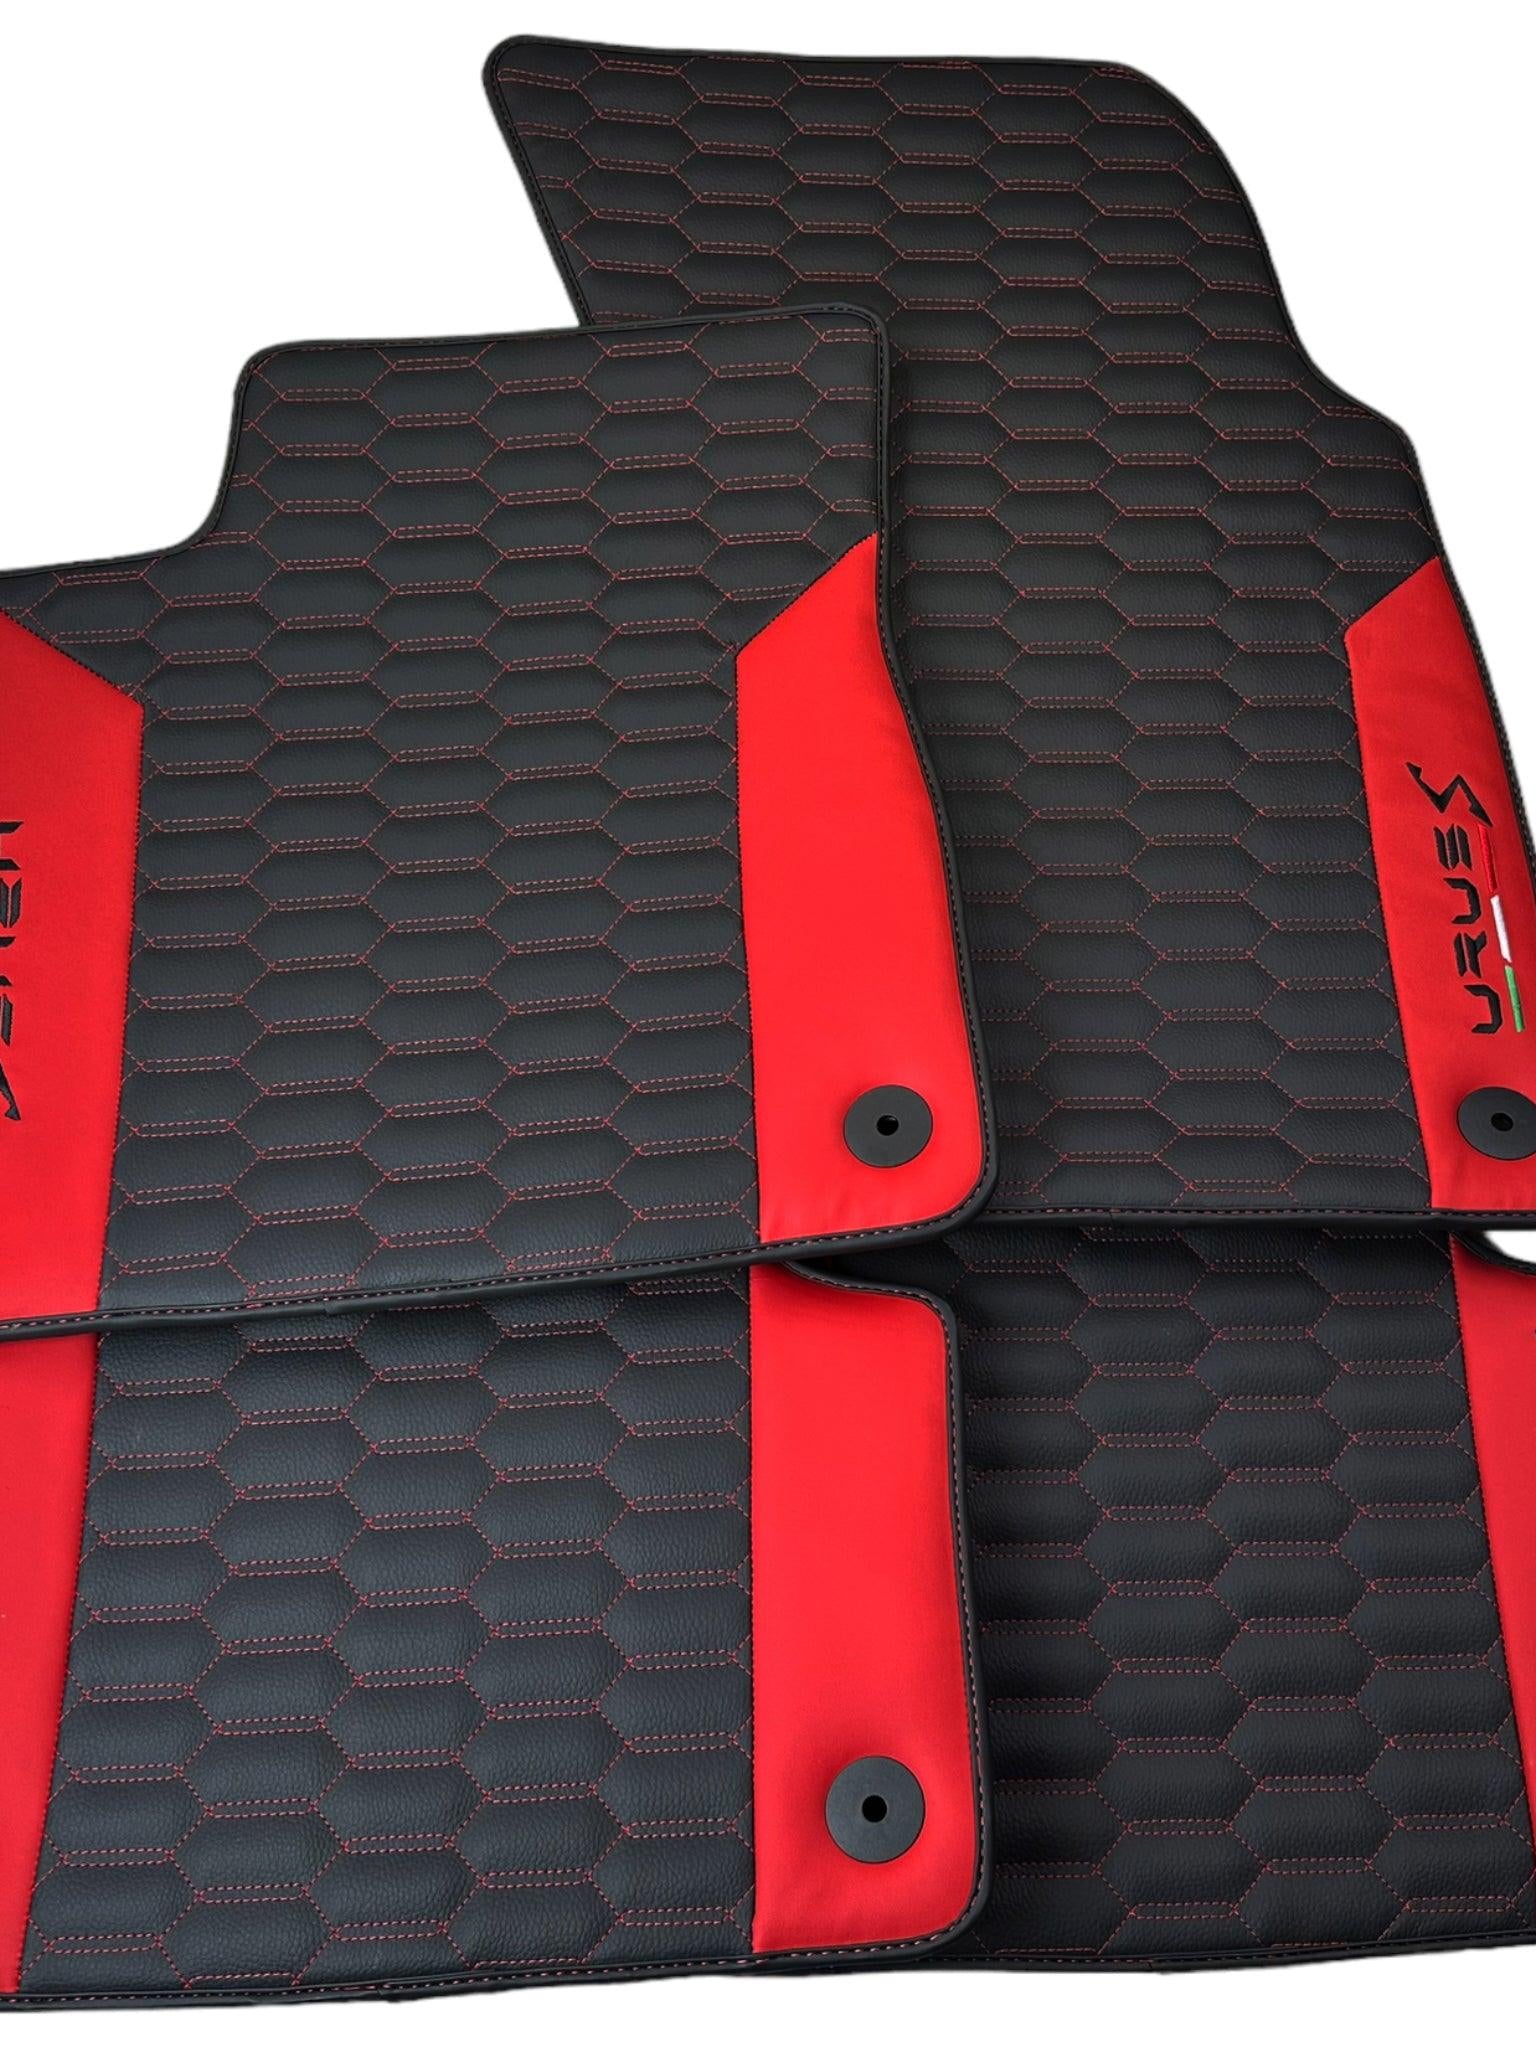 Black Leather Floor Mats For Lamborghini Urus S With Red Nappa Leather